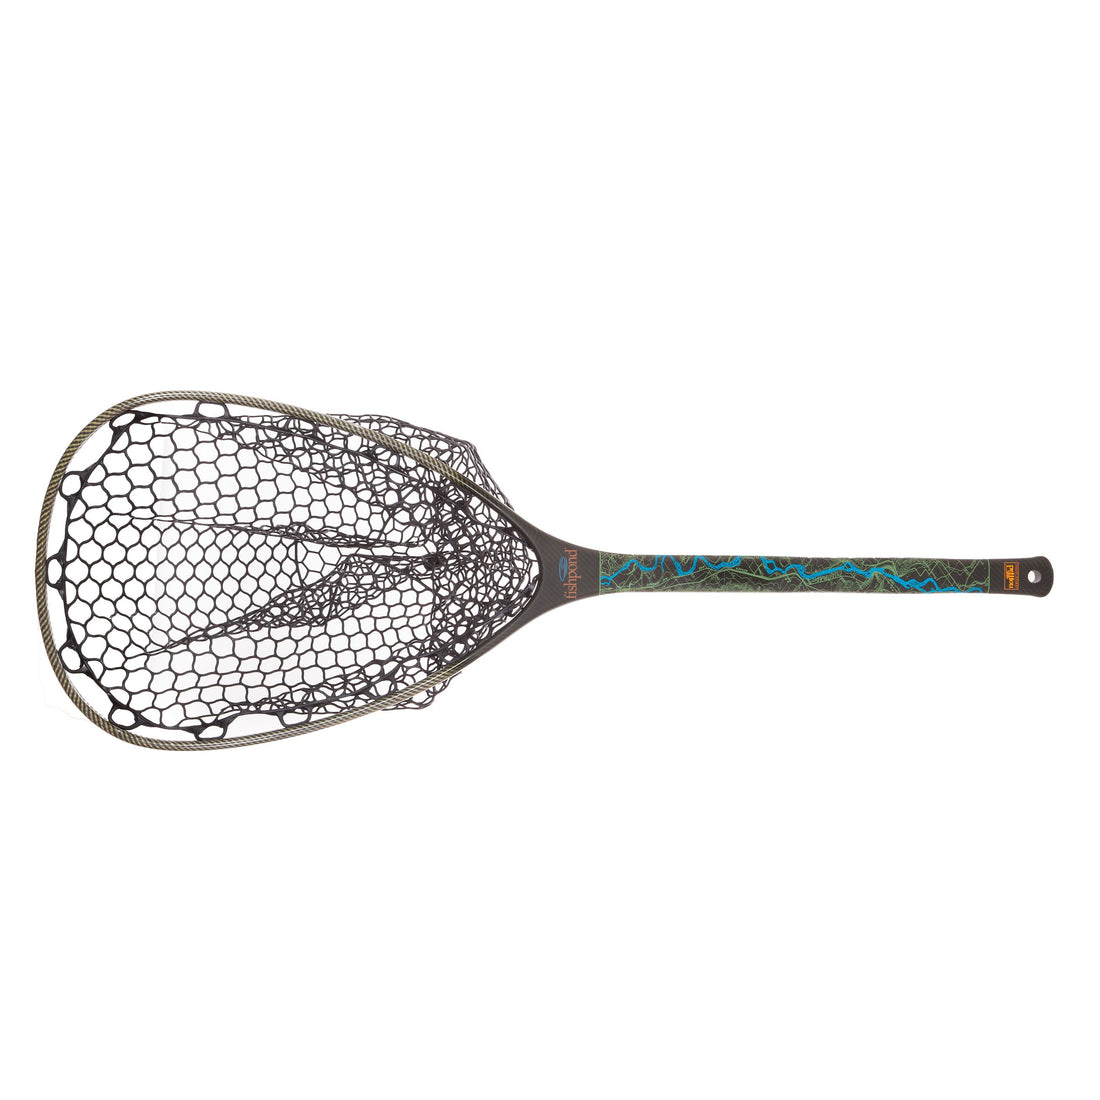 Fishpond Nomad Mid-Length Net - American Rivers